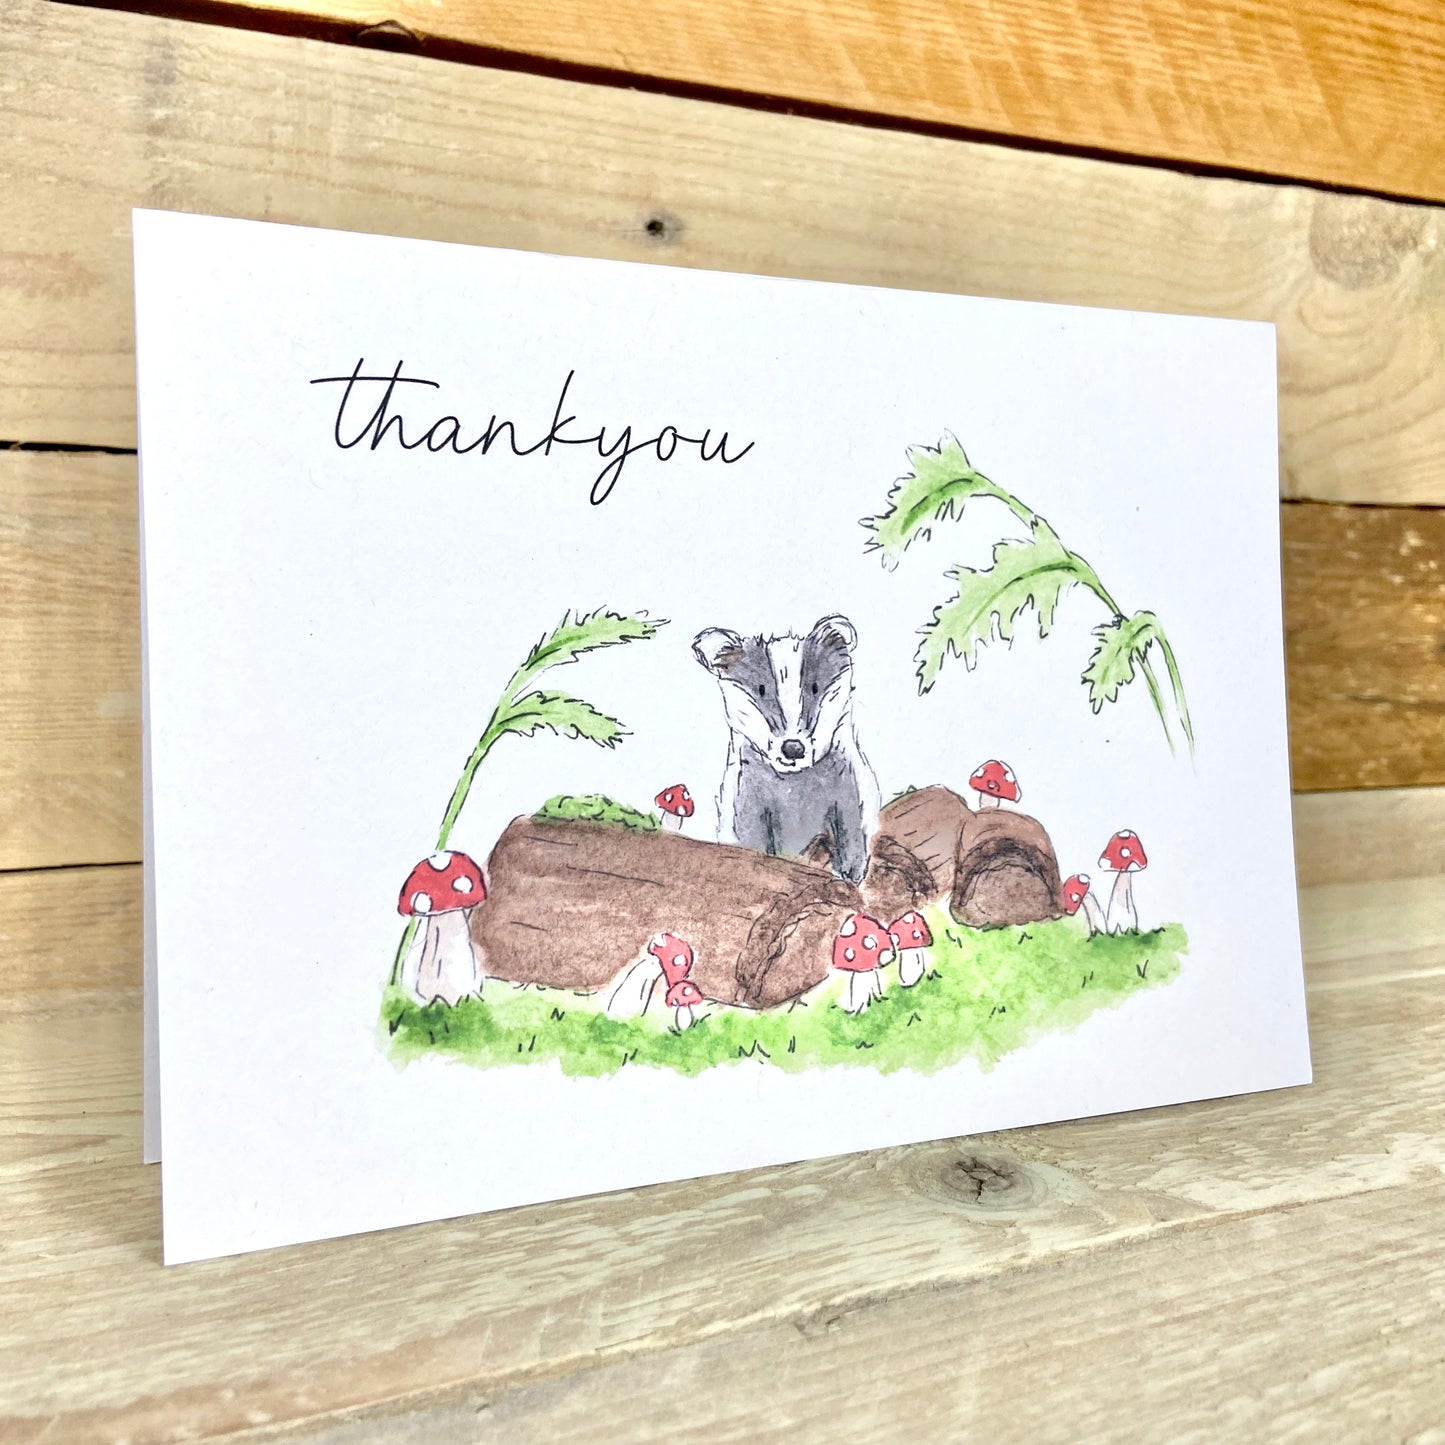 Bob the Badger in the Woods Thankyou Card